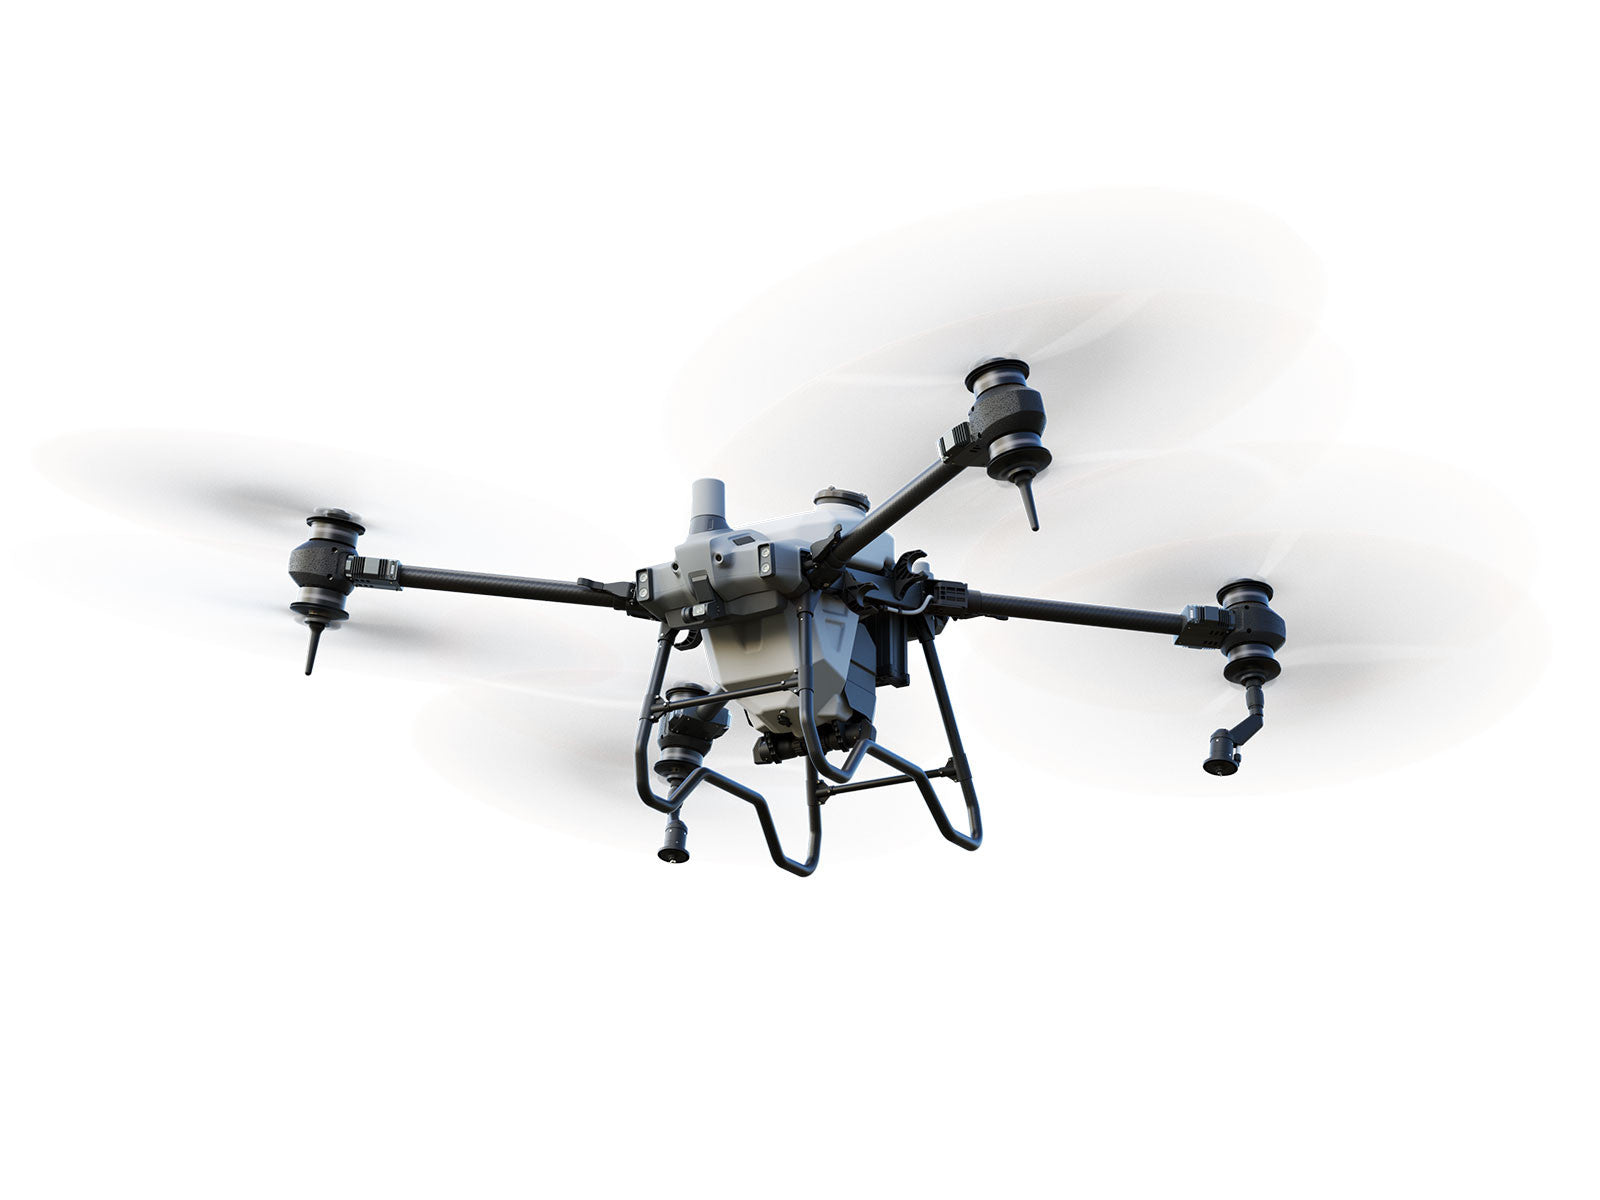 DJI Agras T40 Ready to Fly Kit